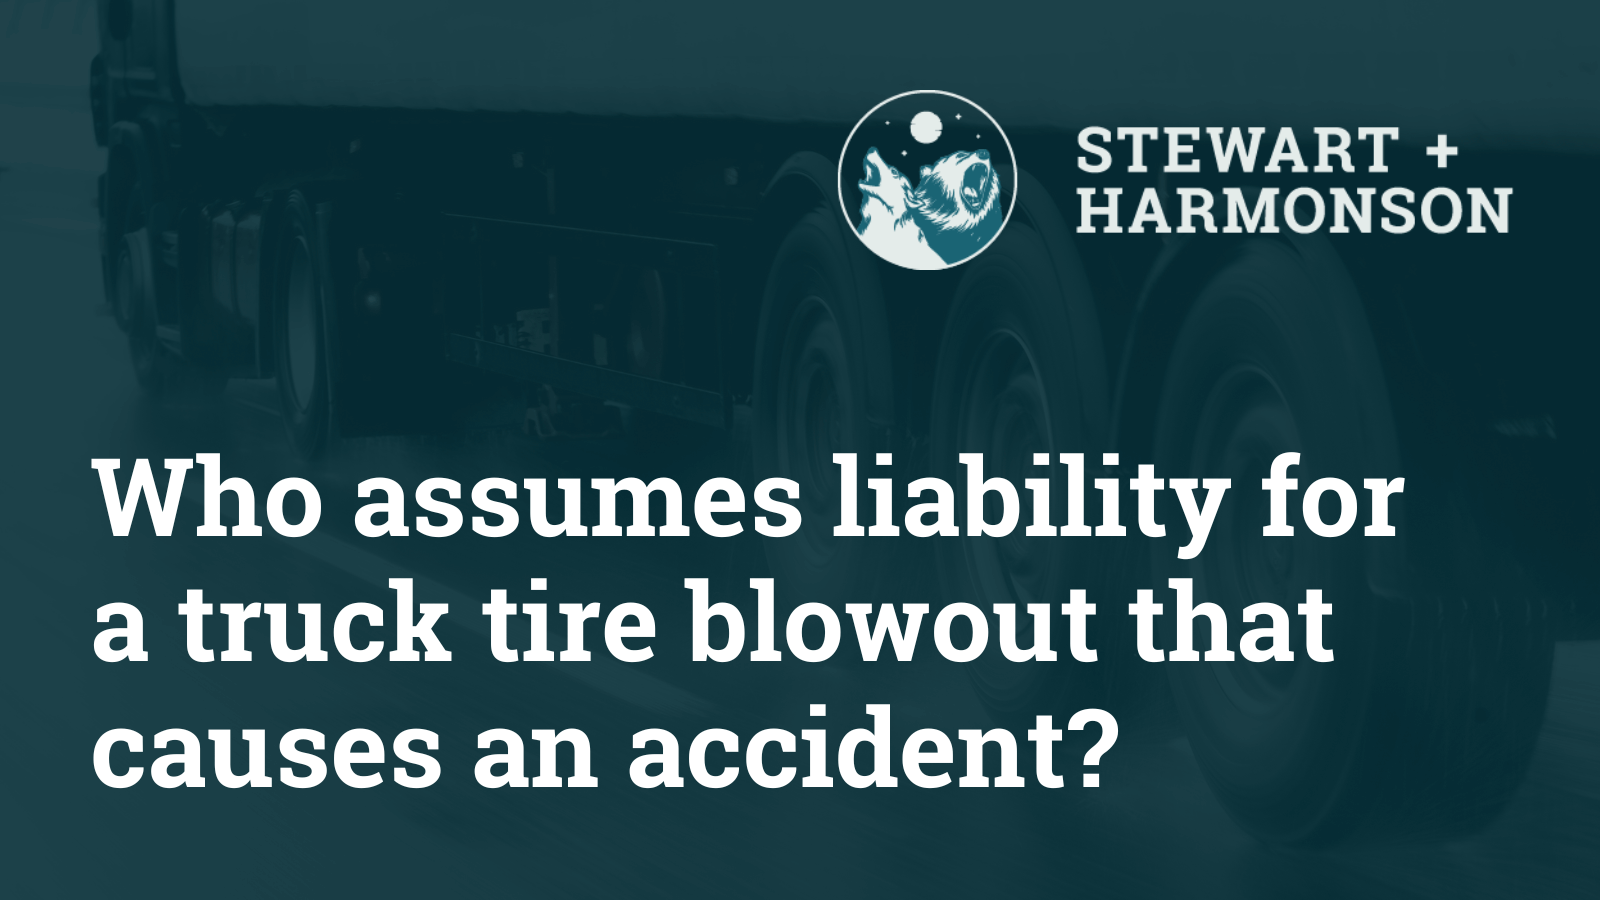 Who assumes liability for a truck tire blowout that causes an accident - Stewart Harmonson Law Firm - New Mexico